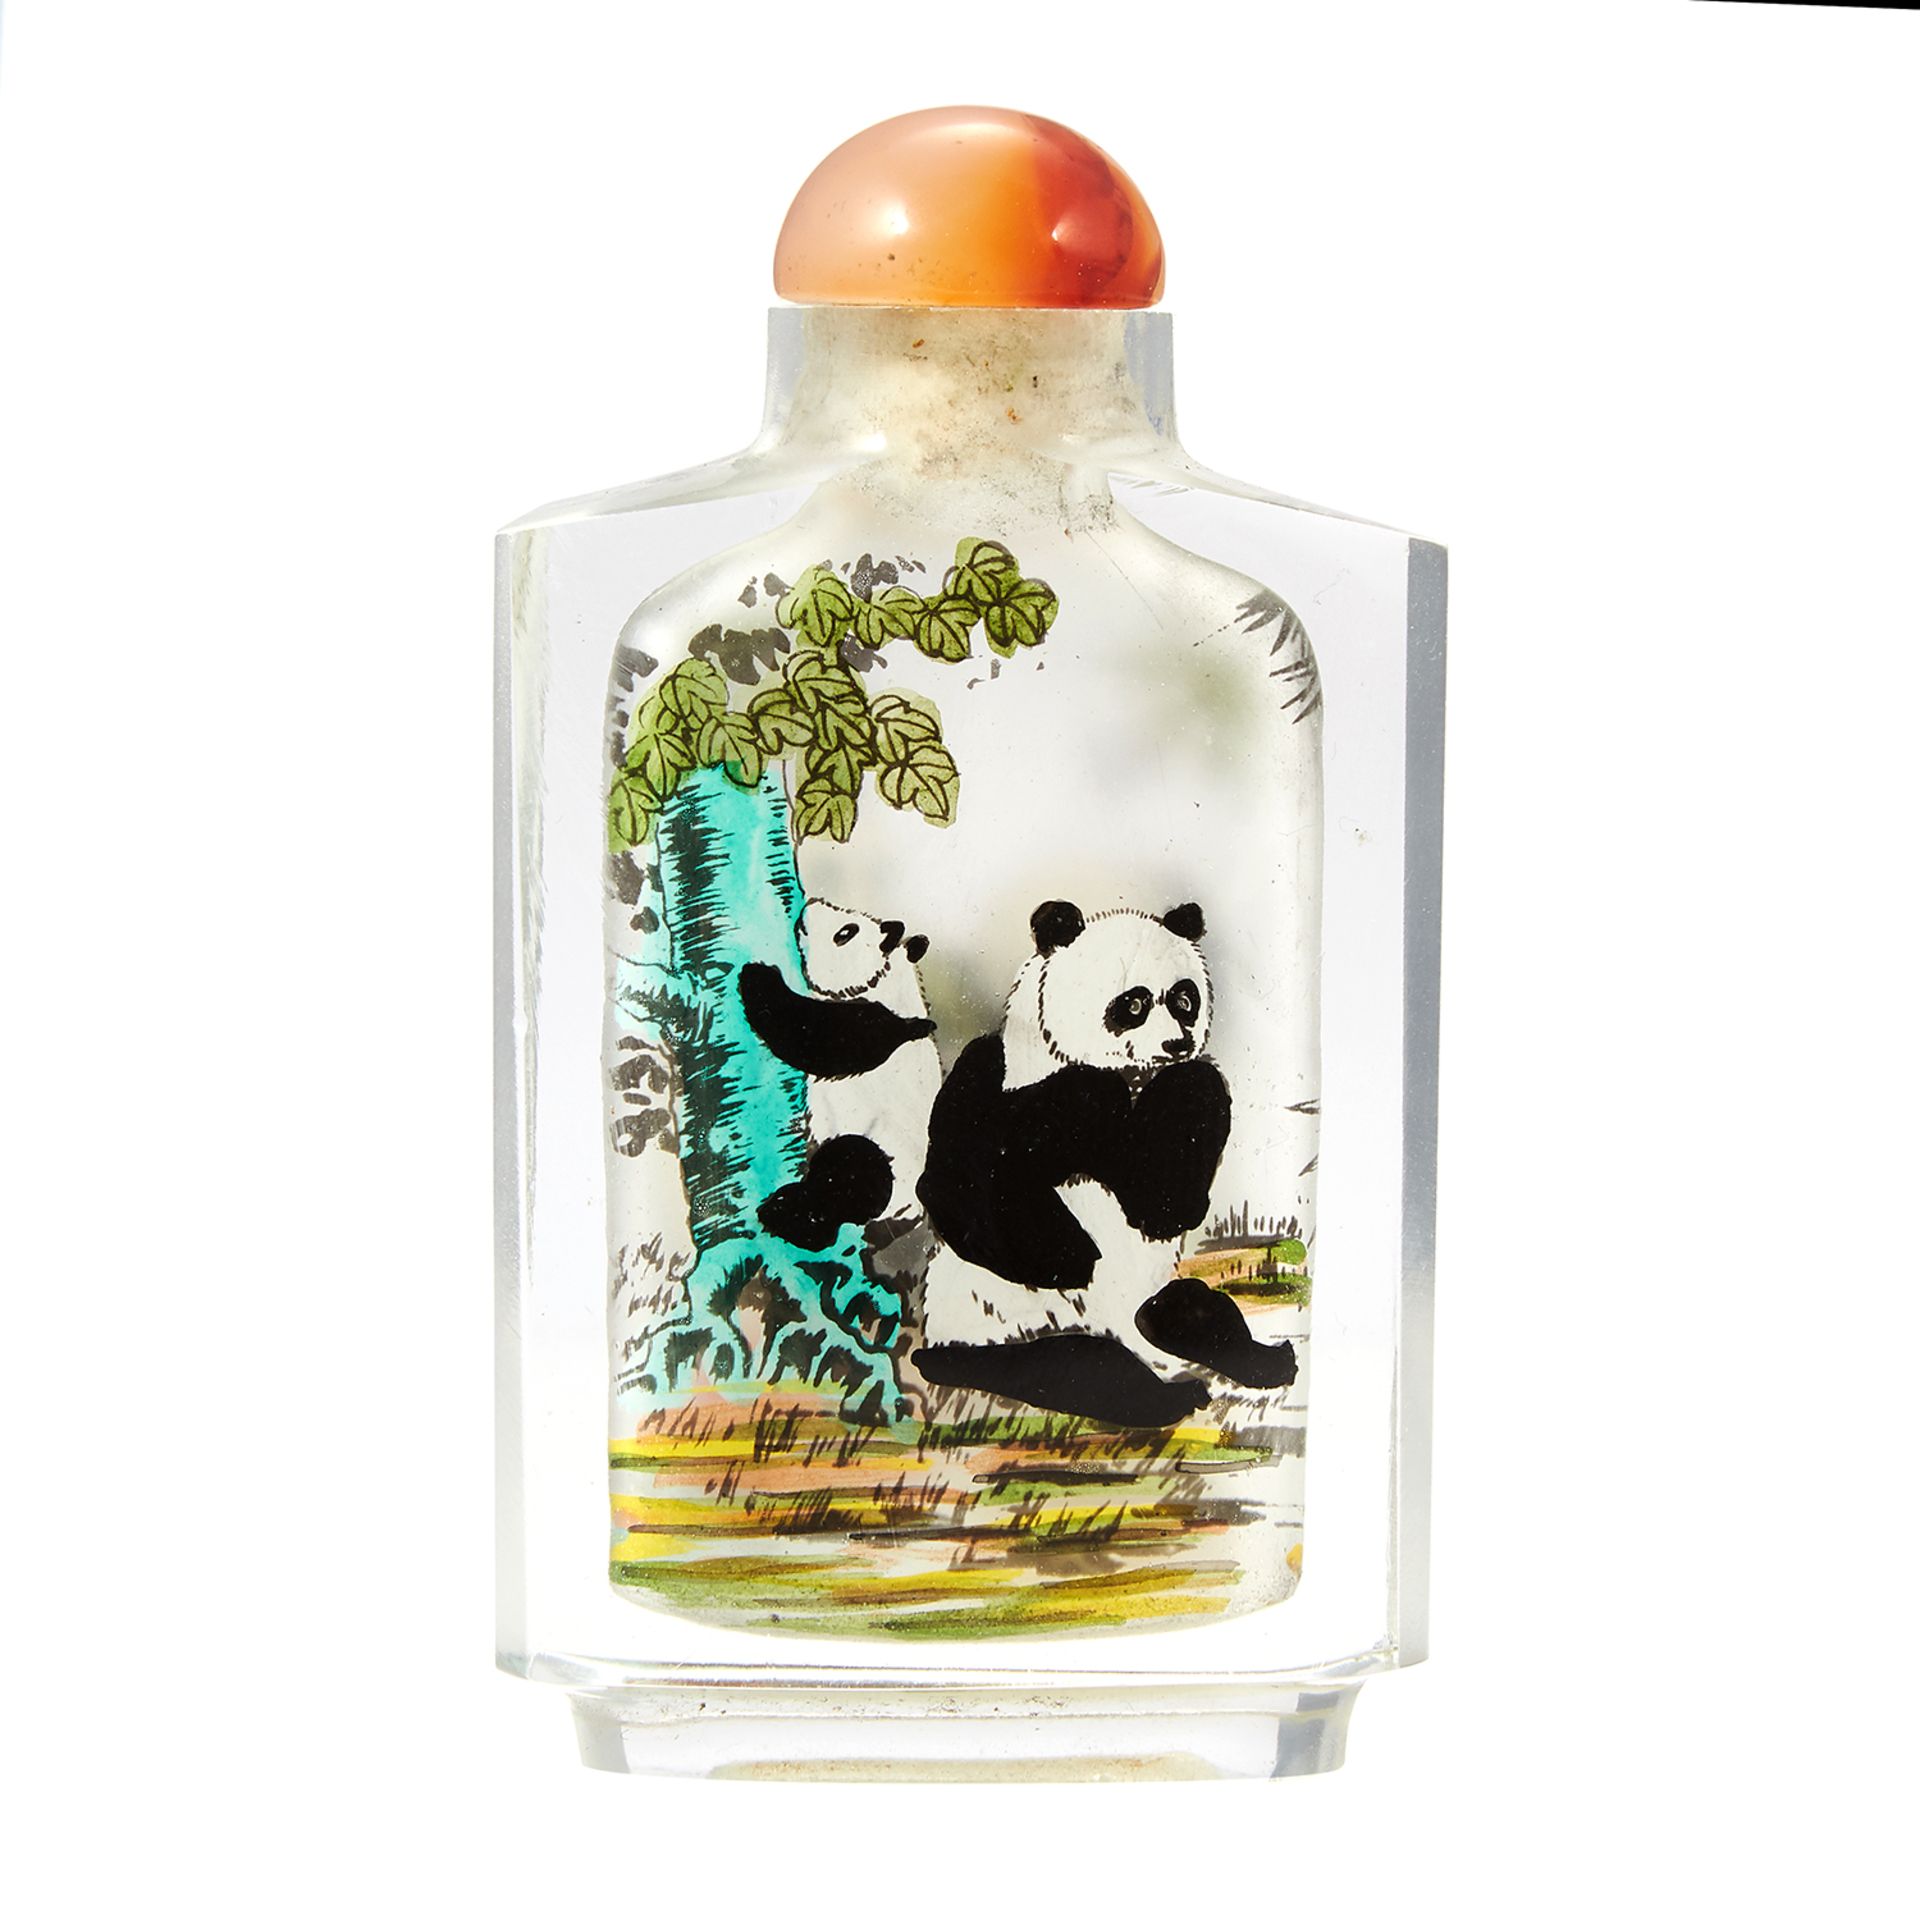 A CHINESE PAINTED GLASS SNUFF BOTTLE with painted scenes of pandas, 8.3cm.